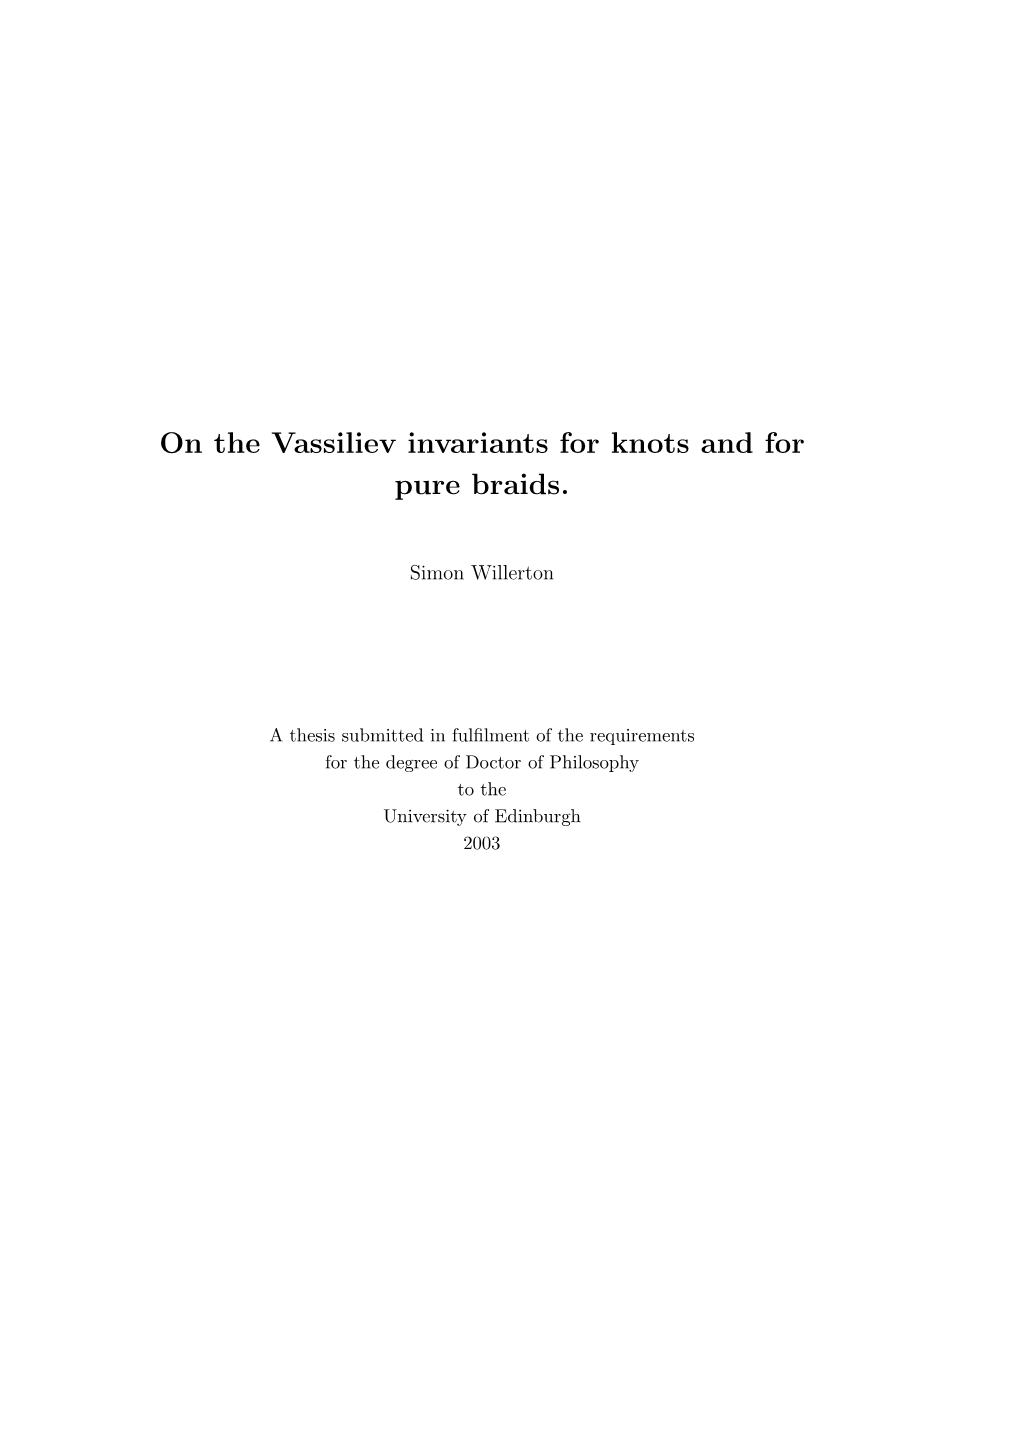 On the Vassiliev Invariants for Knots and for Pure Braids